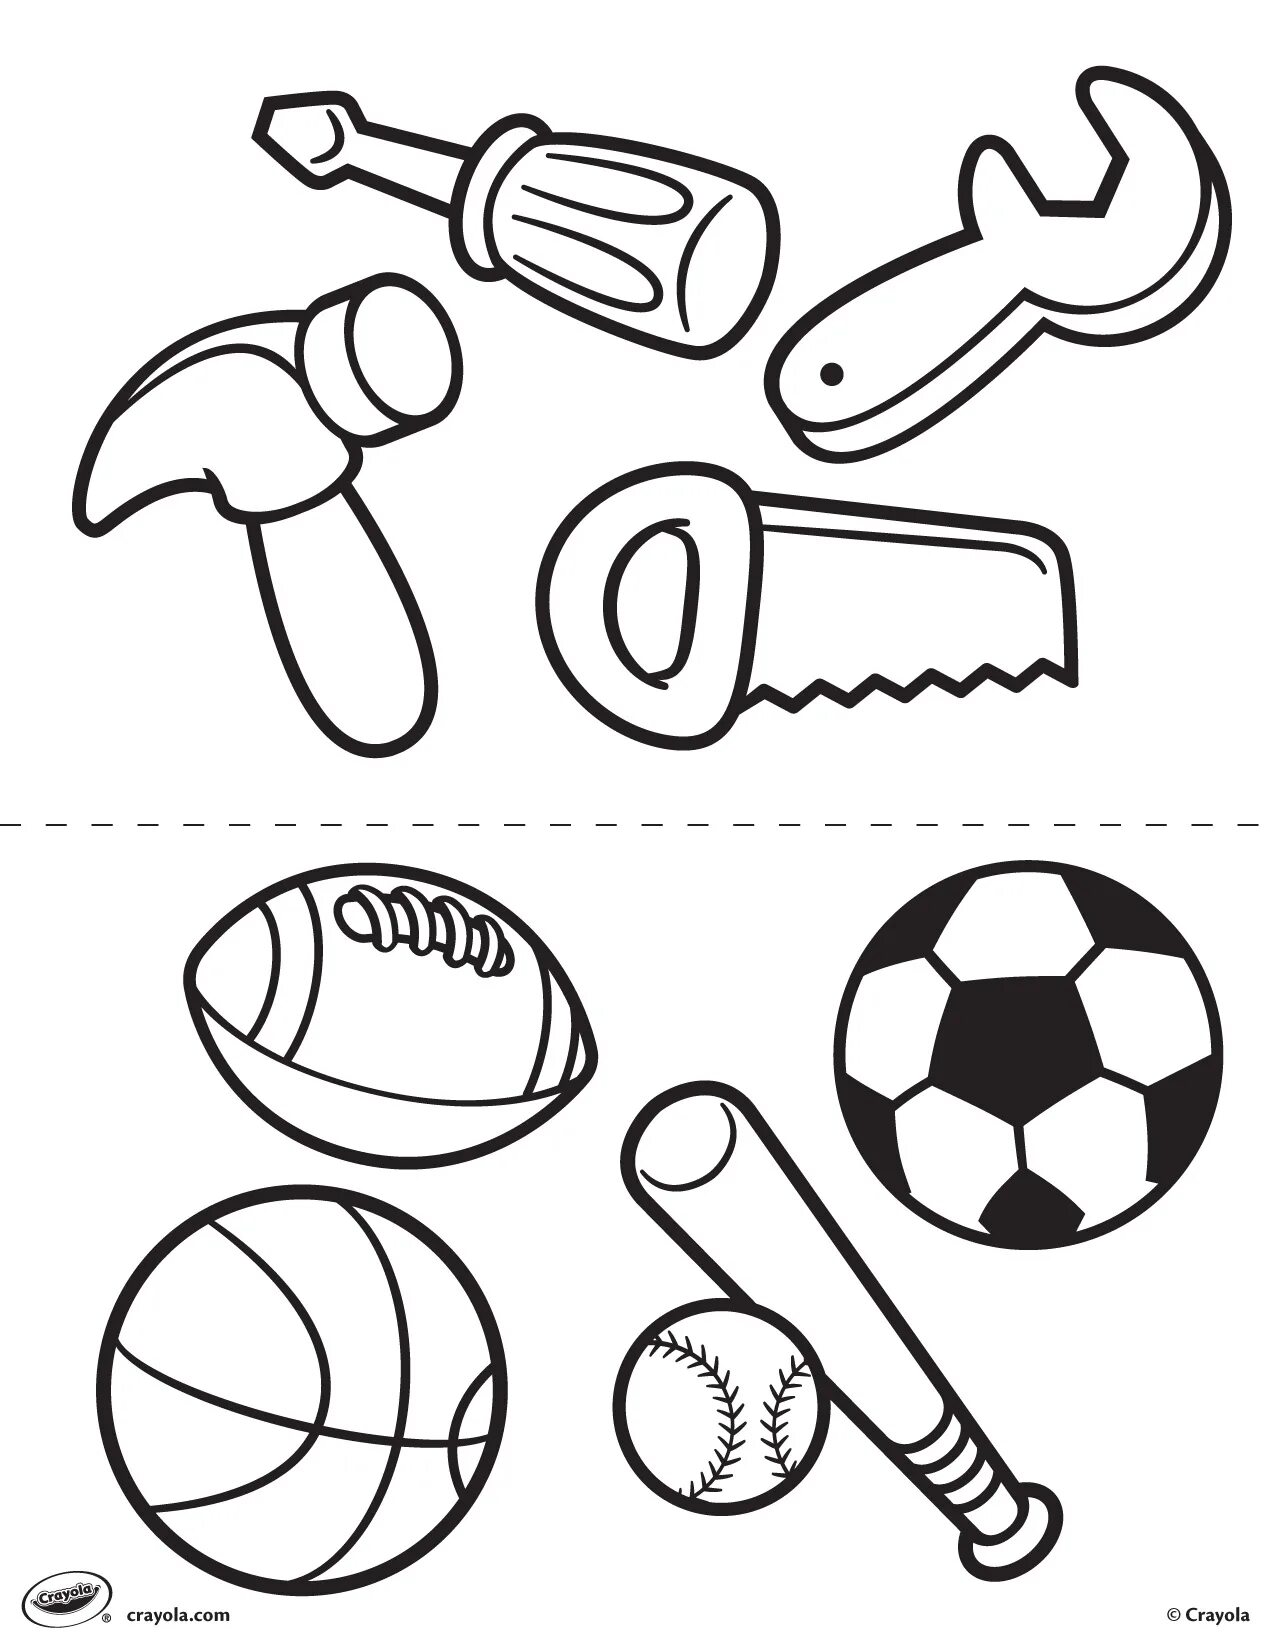 Colorful sports equipment coloring page for kids